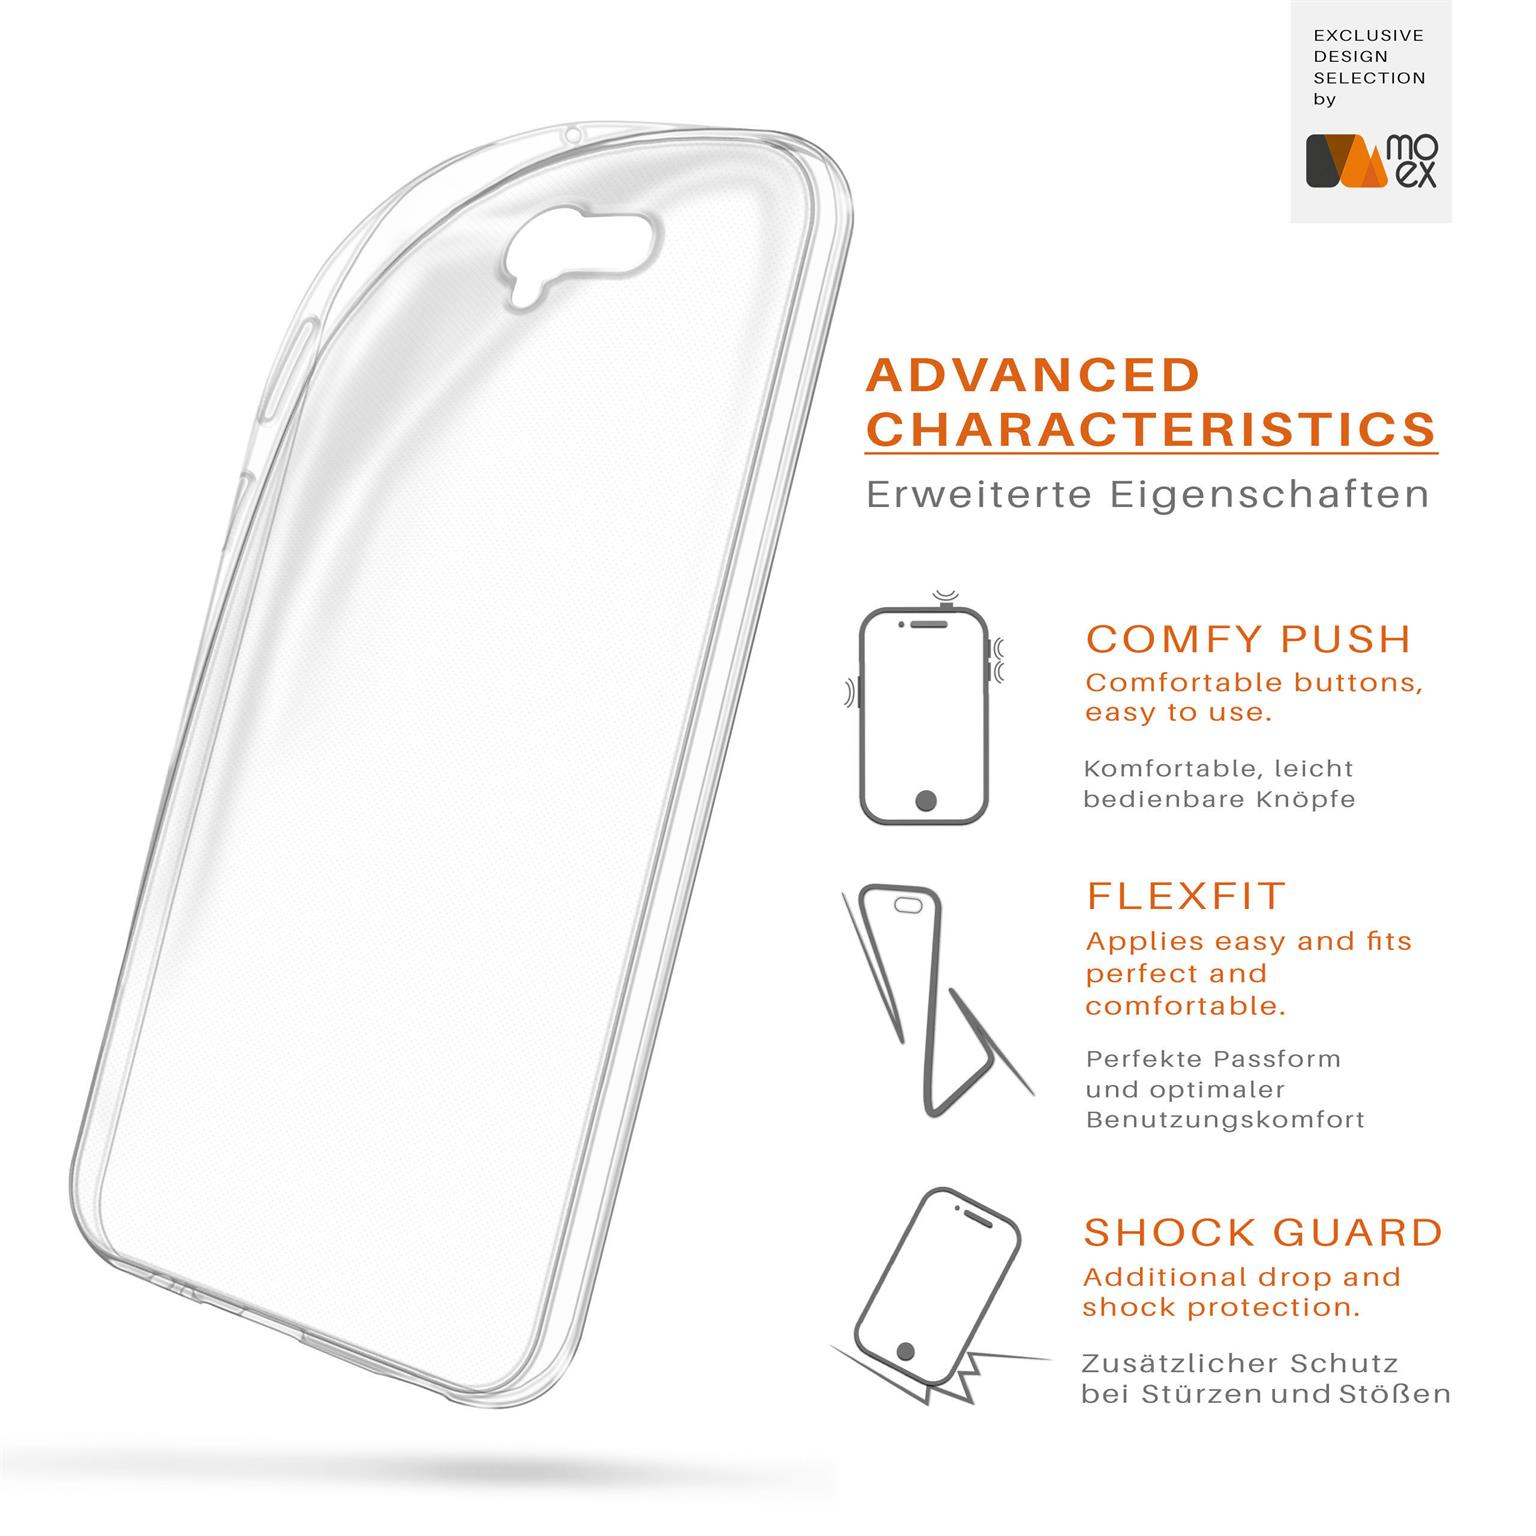 Crystal-Clear MOEX Backcover, HTC, Aero One Case, A9,